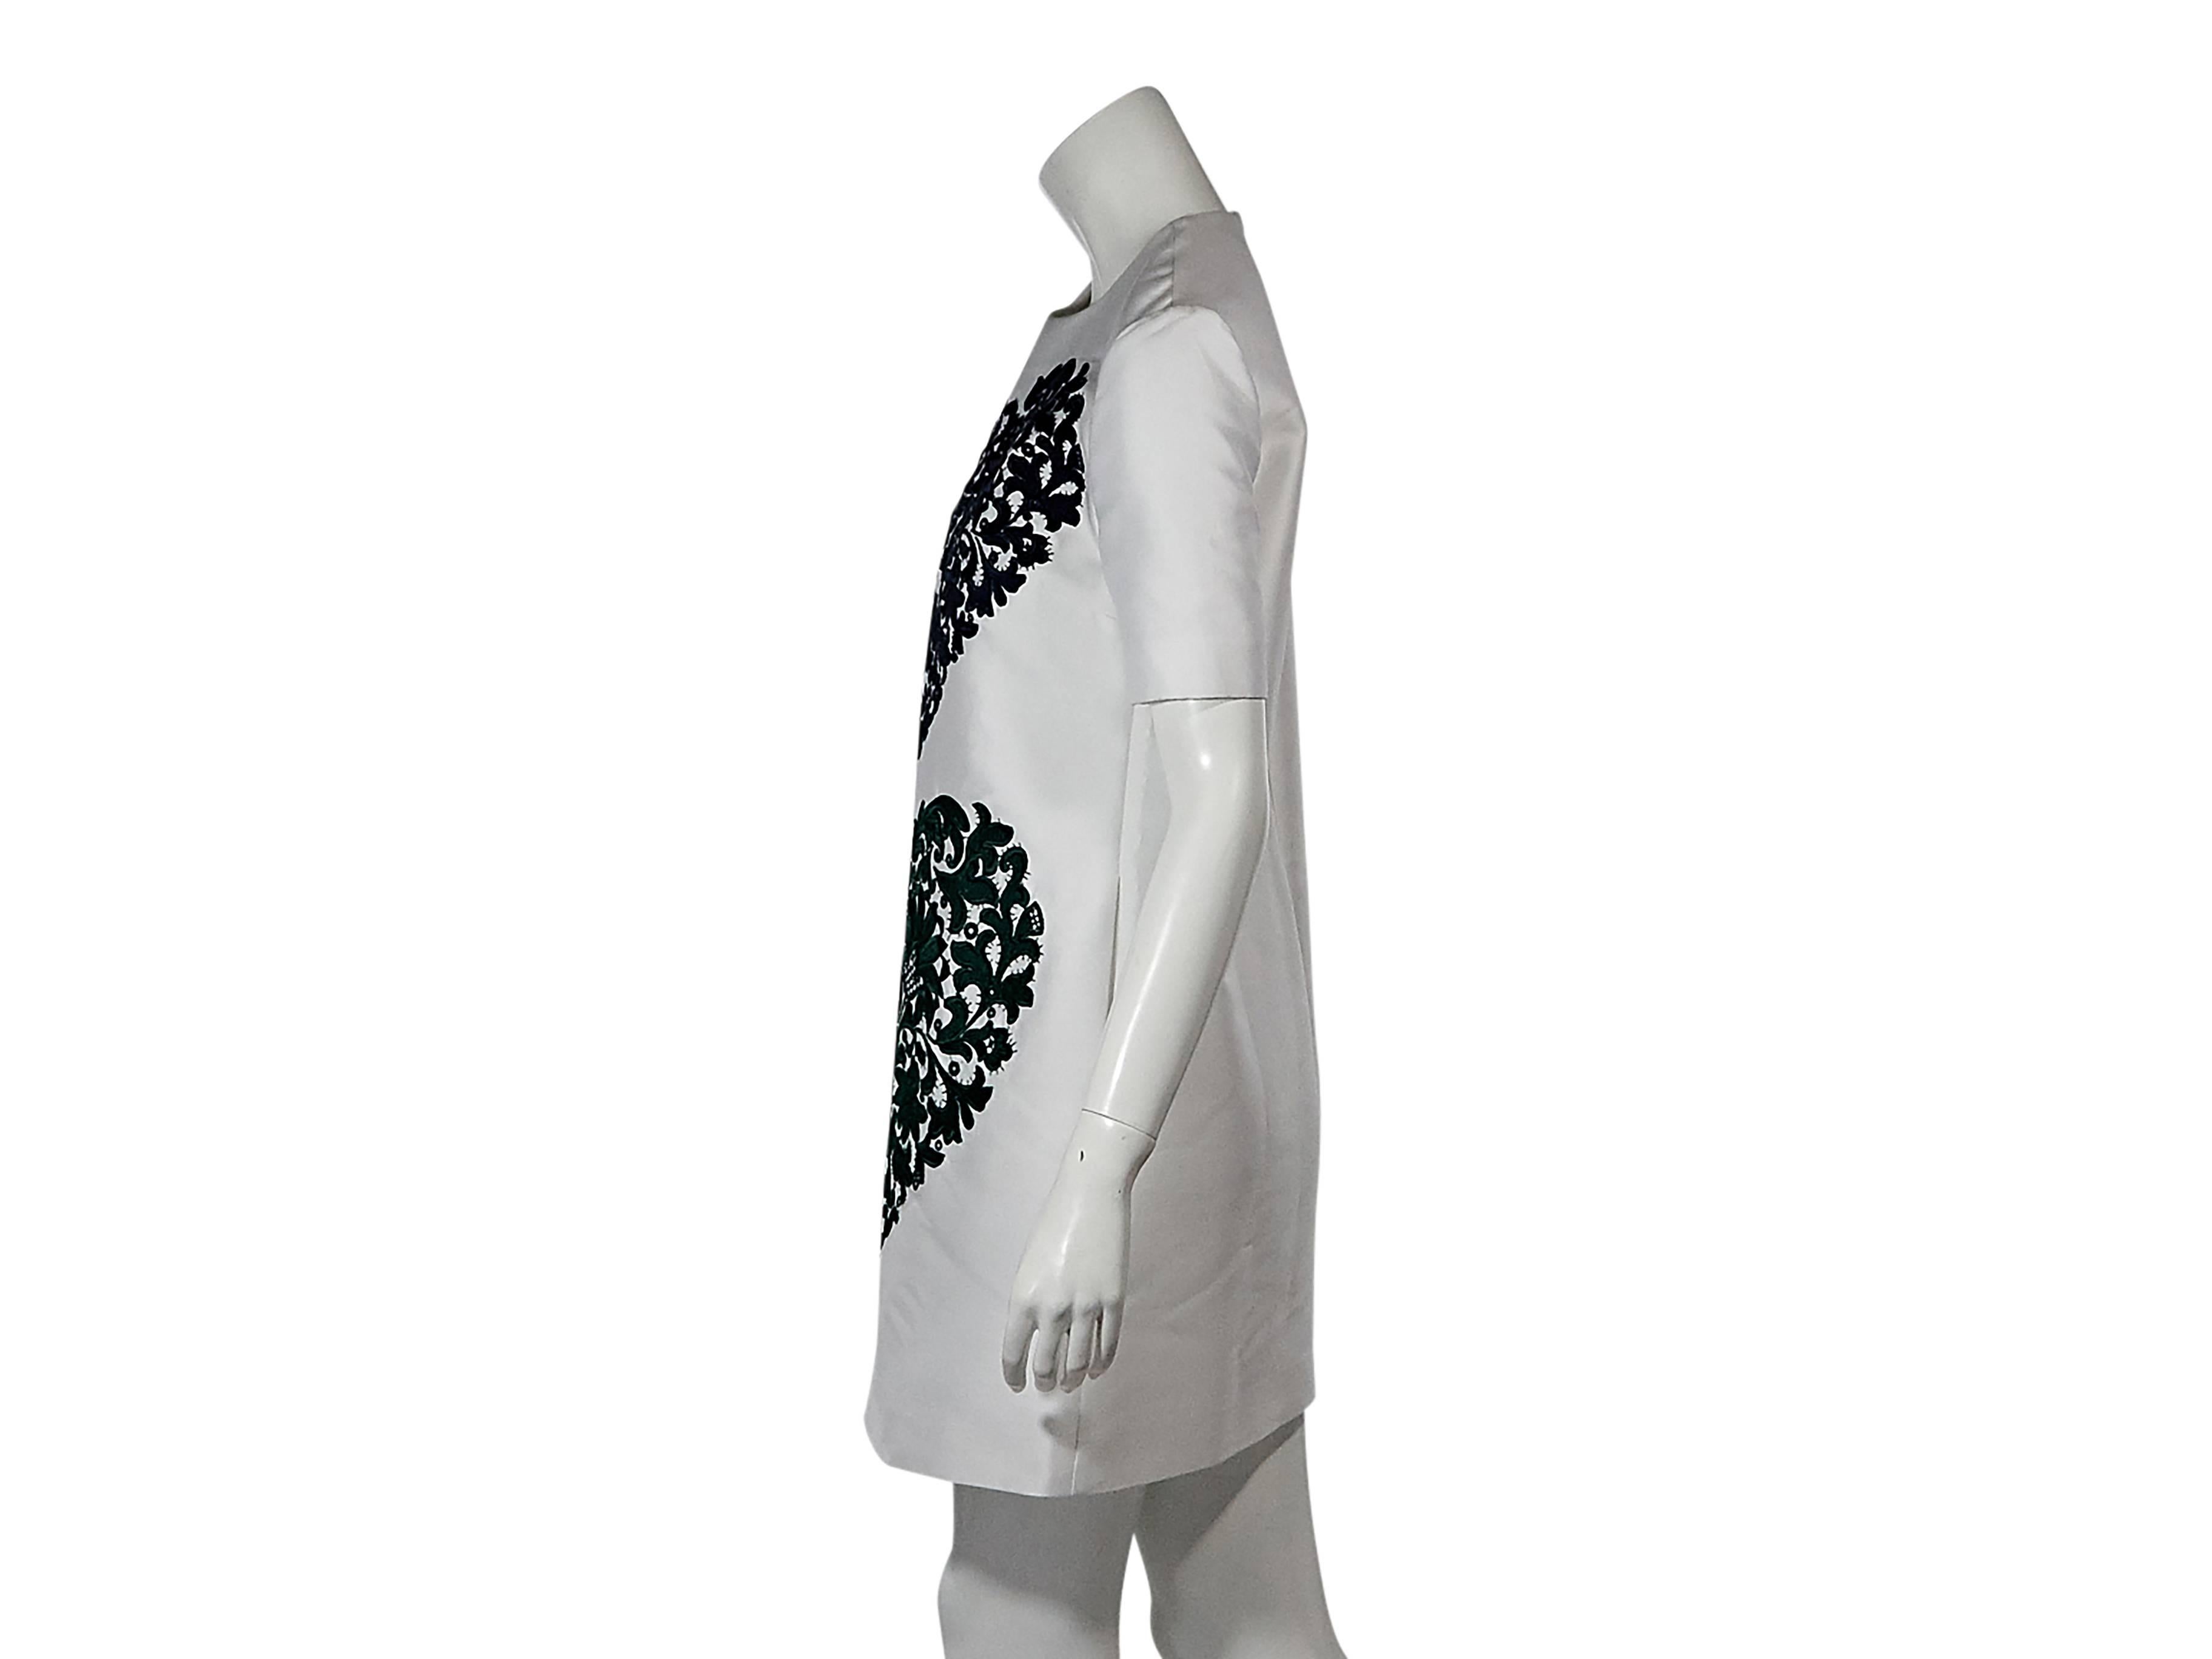 roduct details:  White shift dress by Stella McCartney.  Accented with navy blue and green lace hearts.  Crewneck.  Short sleeves.  Concealed back zip closure.  Label size IT 40.
Condition: Pre-owned. Very good.

Est. Retail $ 2,180.00